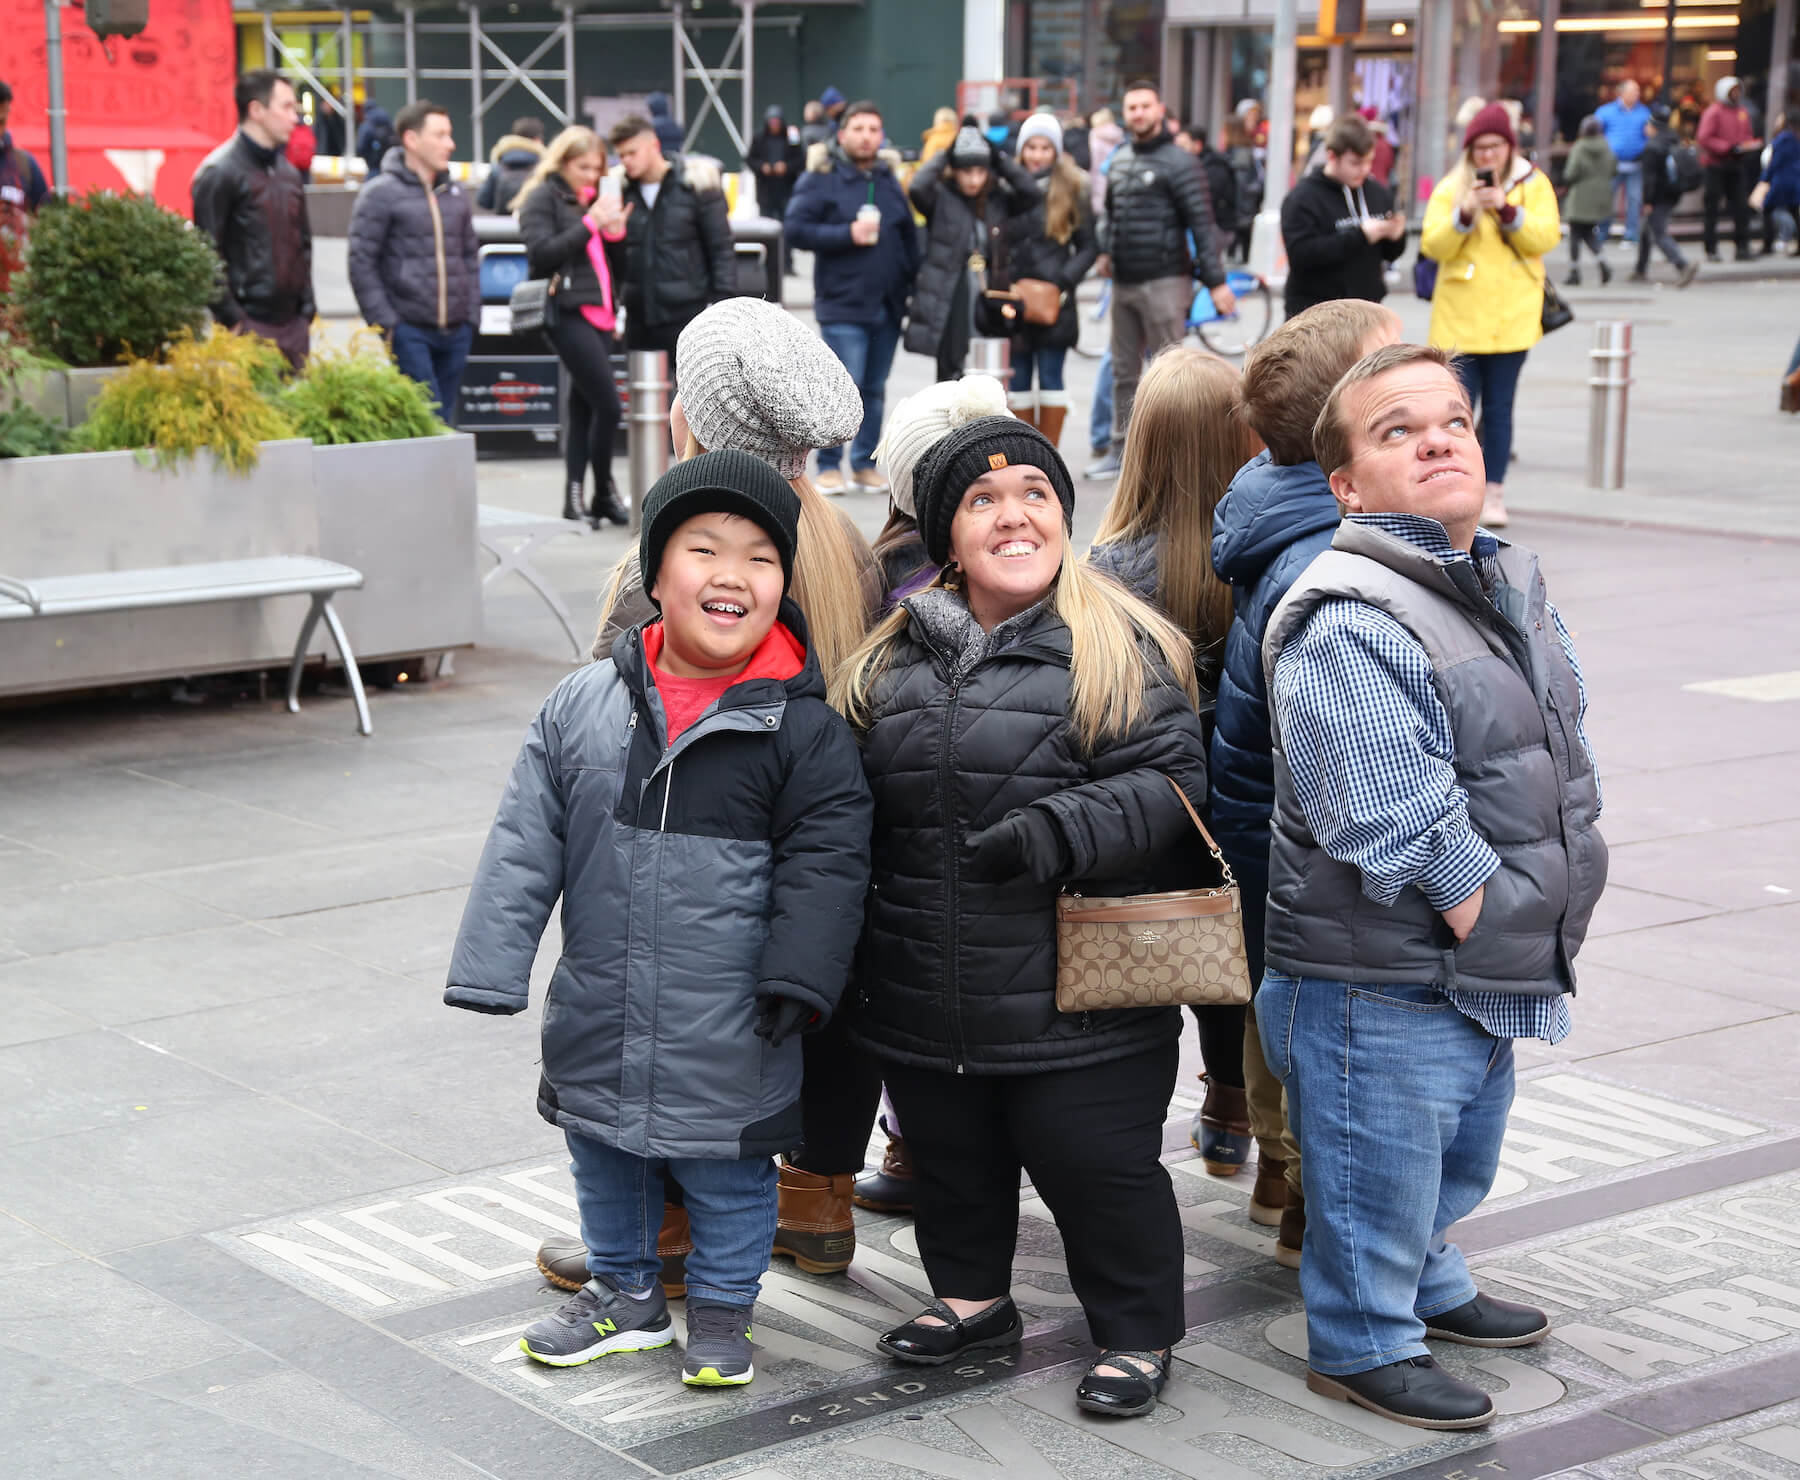 '7 Little Johnstons' cast standing together on the streets of a city